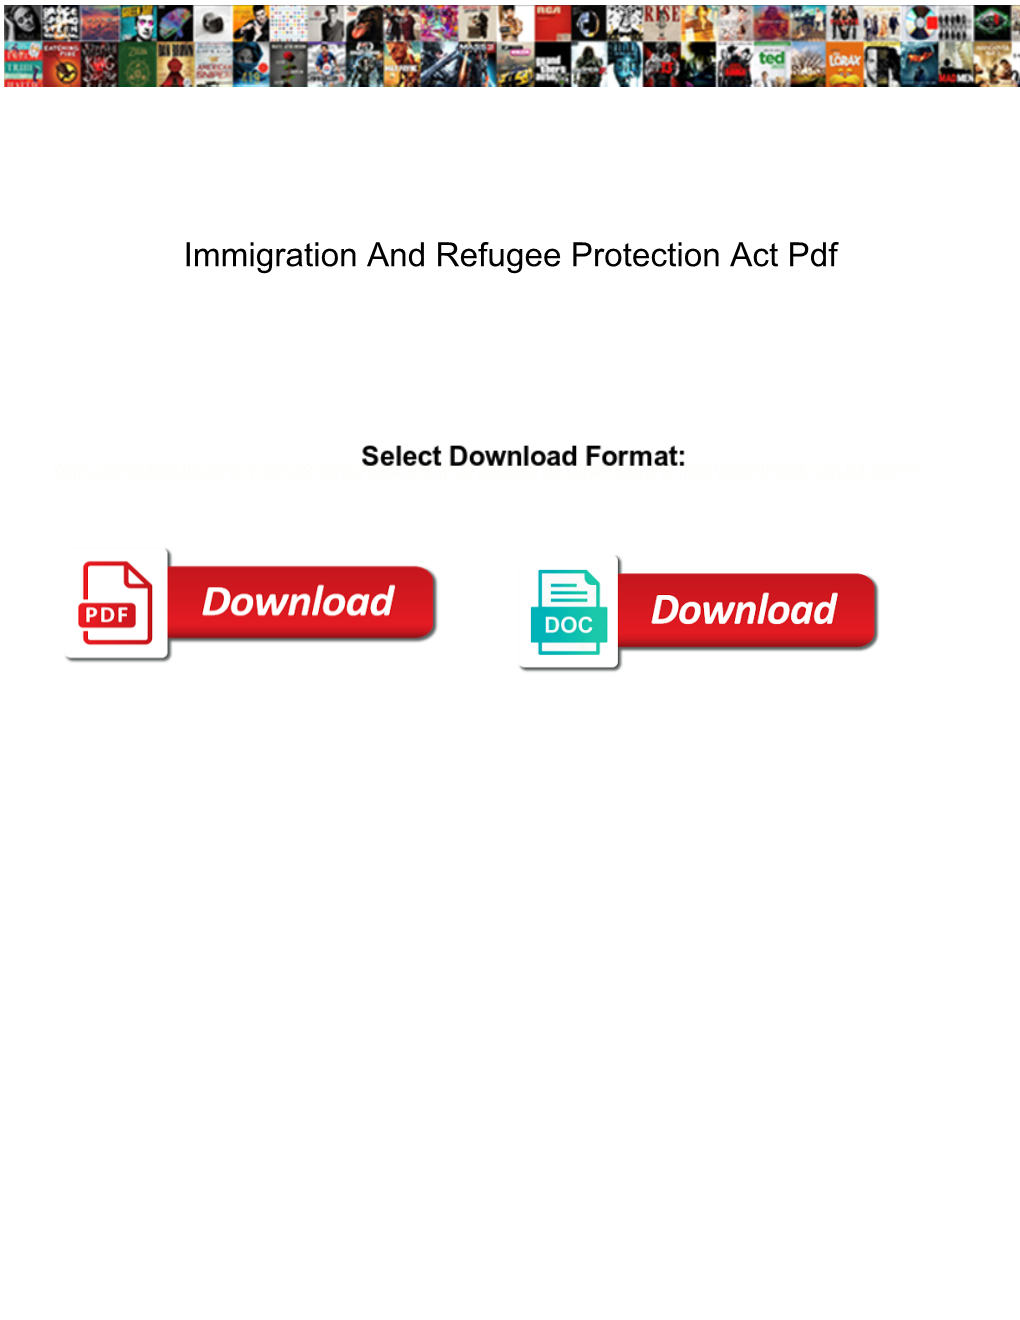 Immigration and Refugee Protection Act Pdf